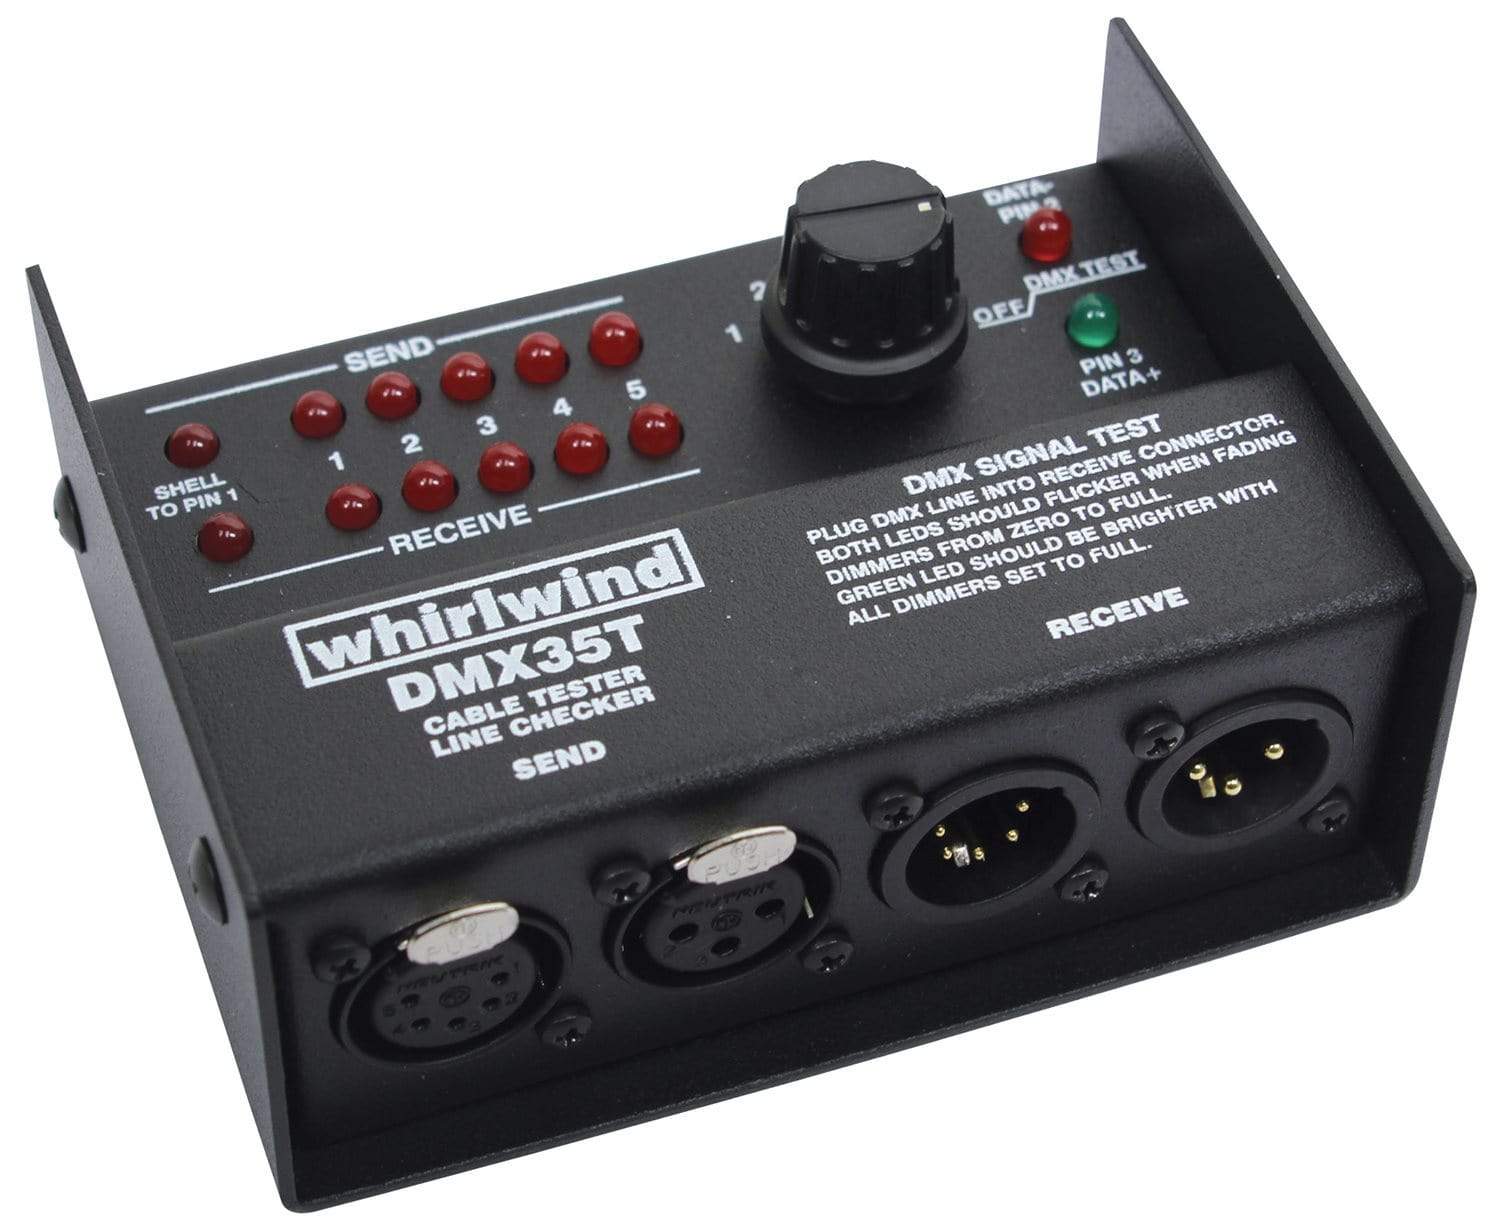 Whirlwind DMX35T 3 & 5 pin XLR DMX Cable Tester